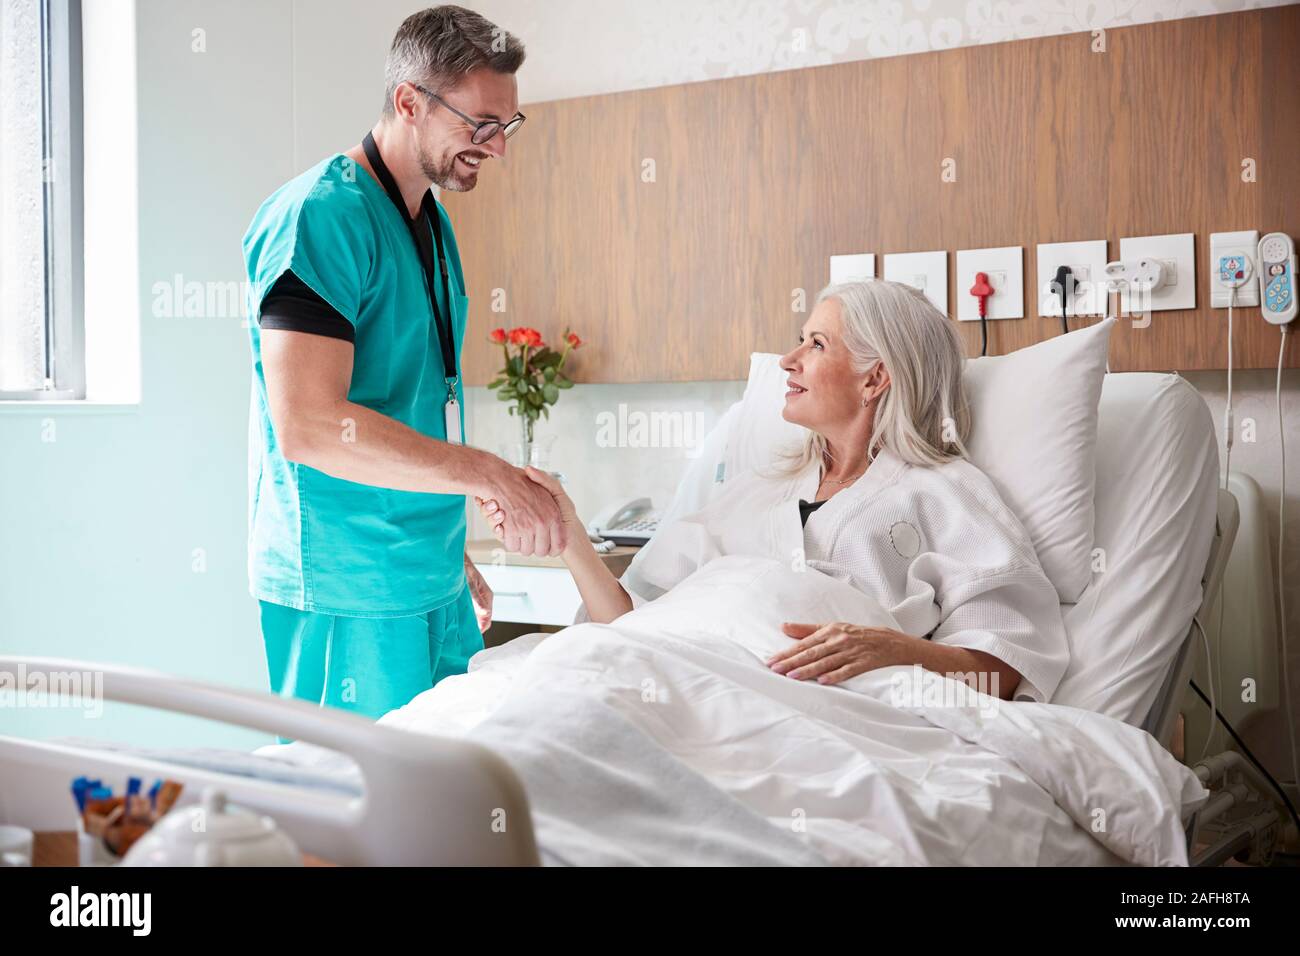 Surgeon Visiting And Shaking Hands With Mature Female Patient In Hospital Bed Stock Photo